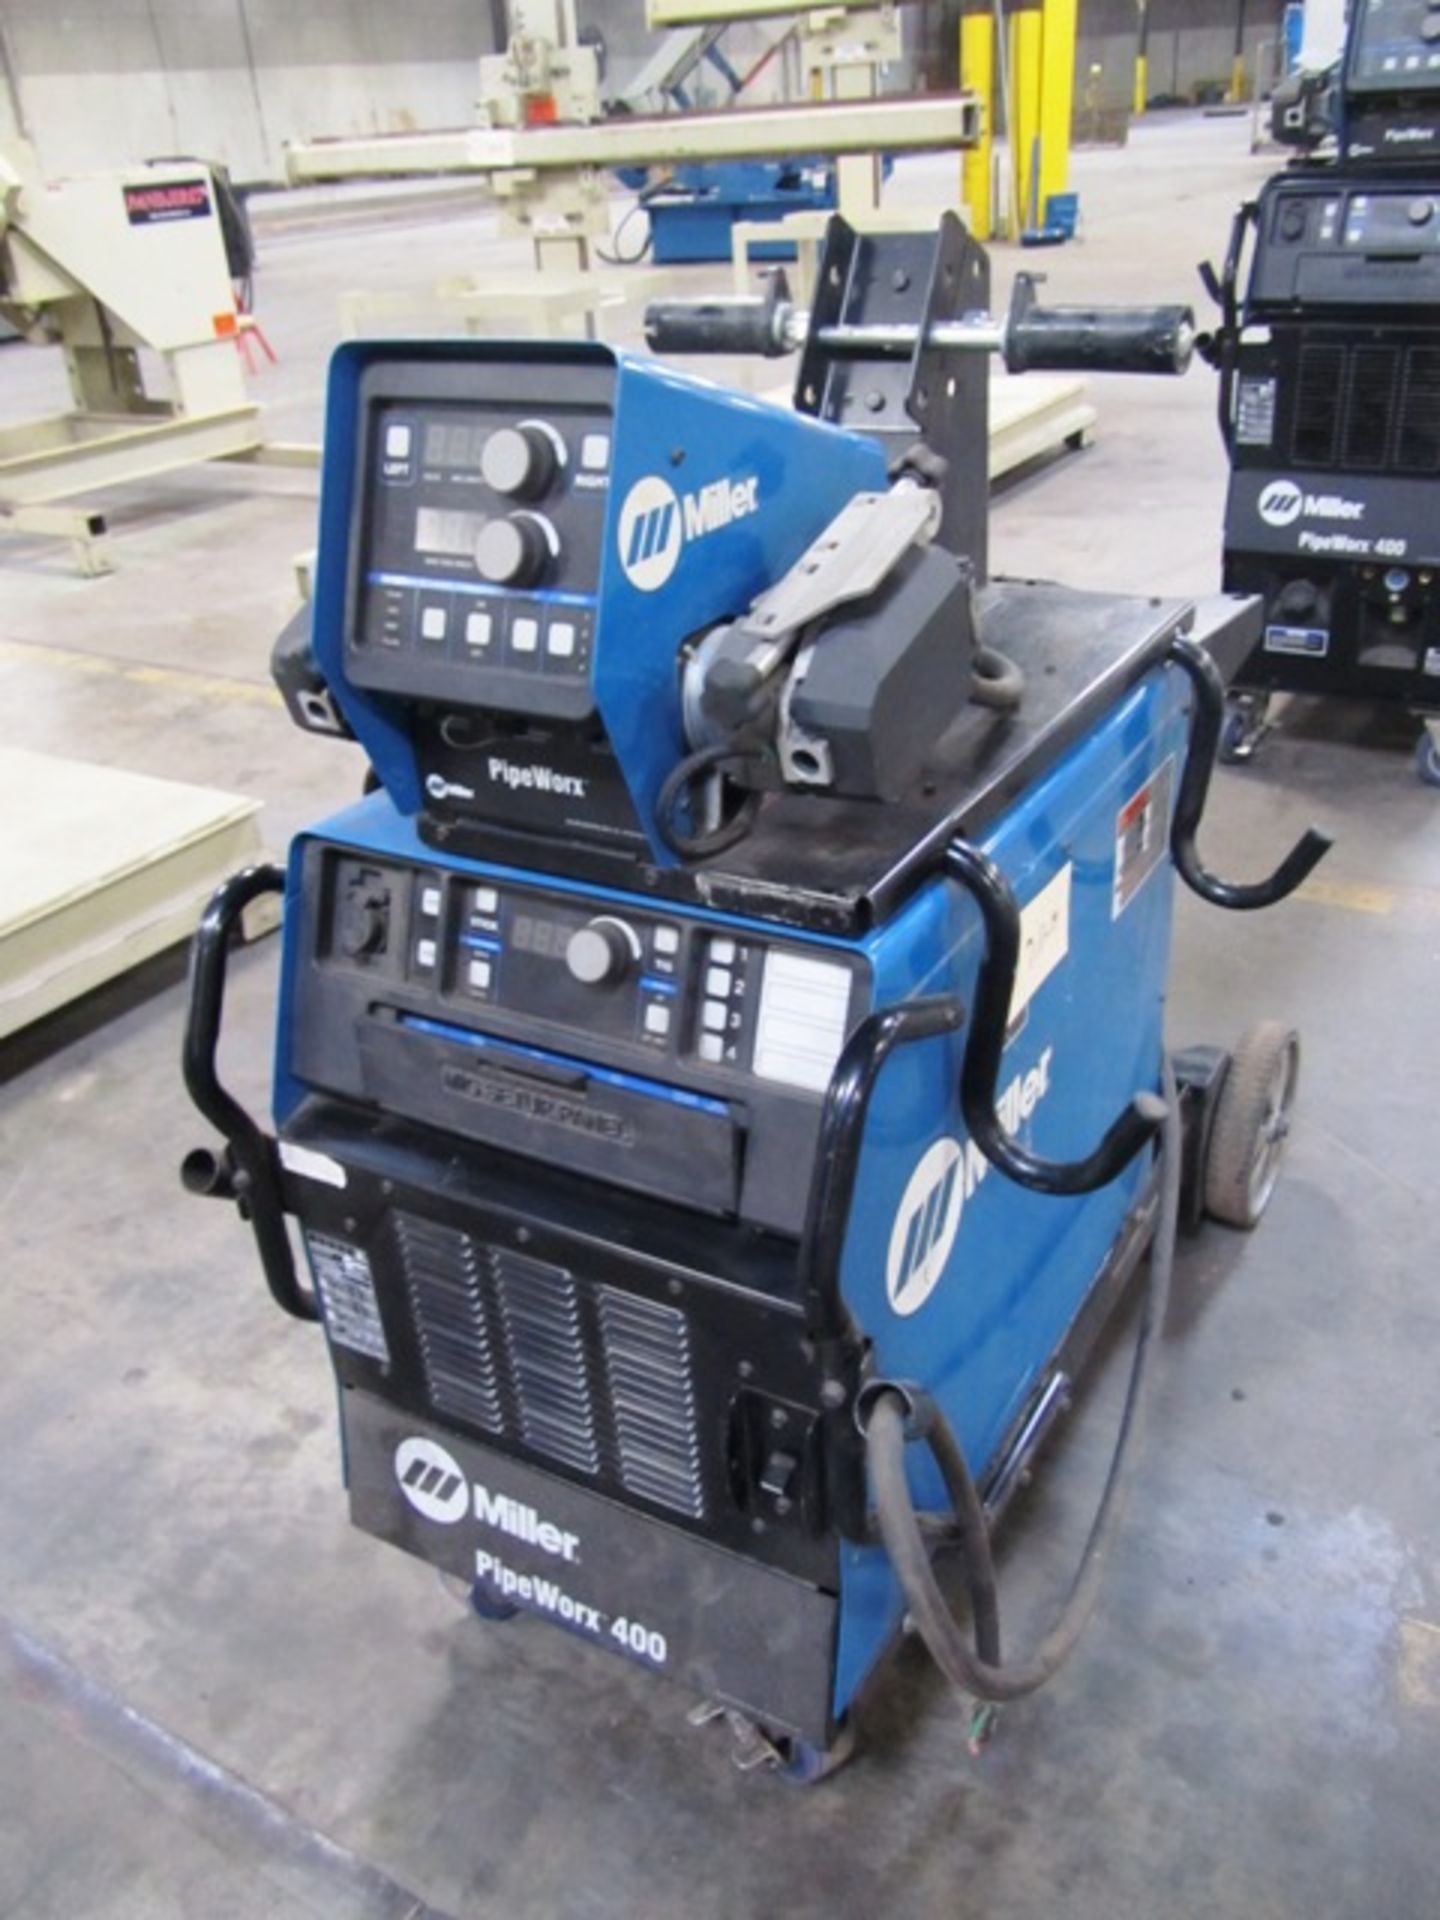 Miller Pipeworx 400 Portable Welder with Pipeworx Dual Wire Feeder, sn:MD110431G